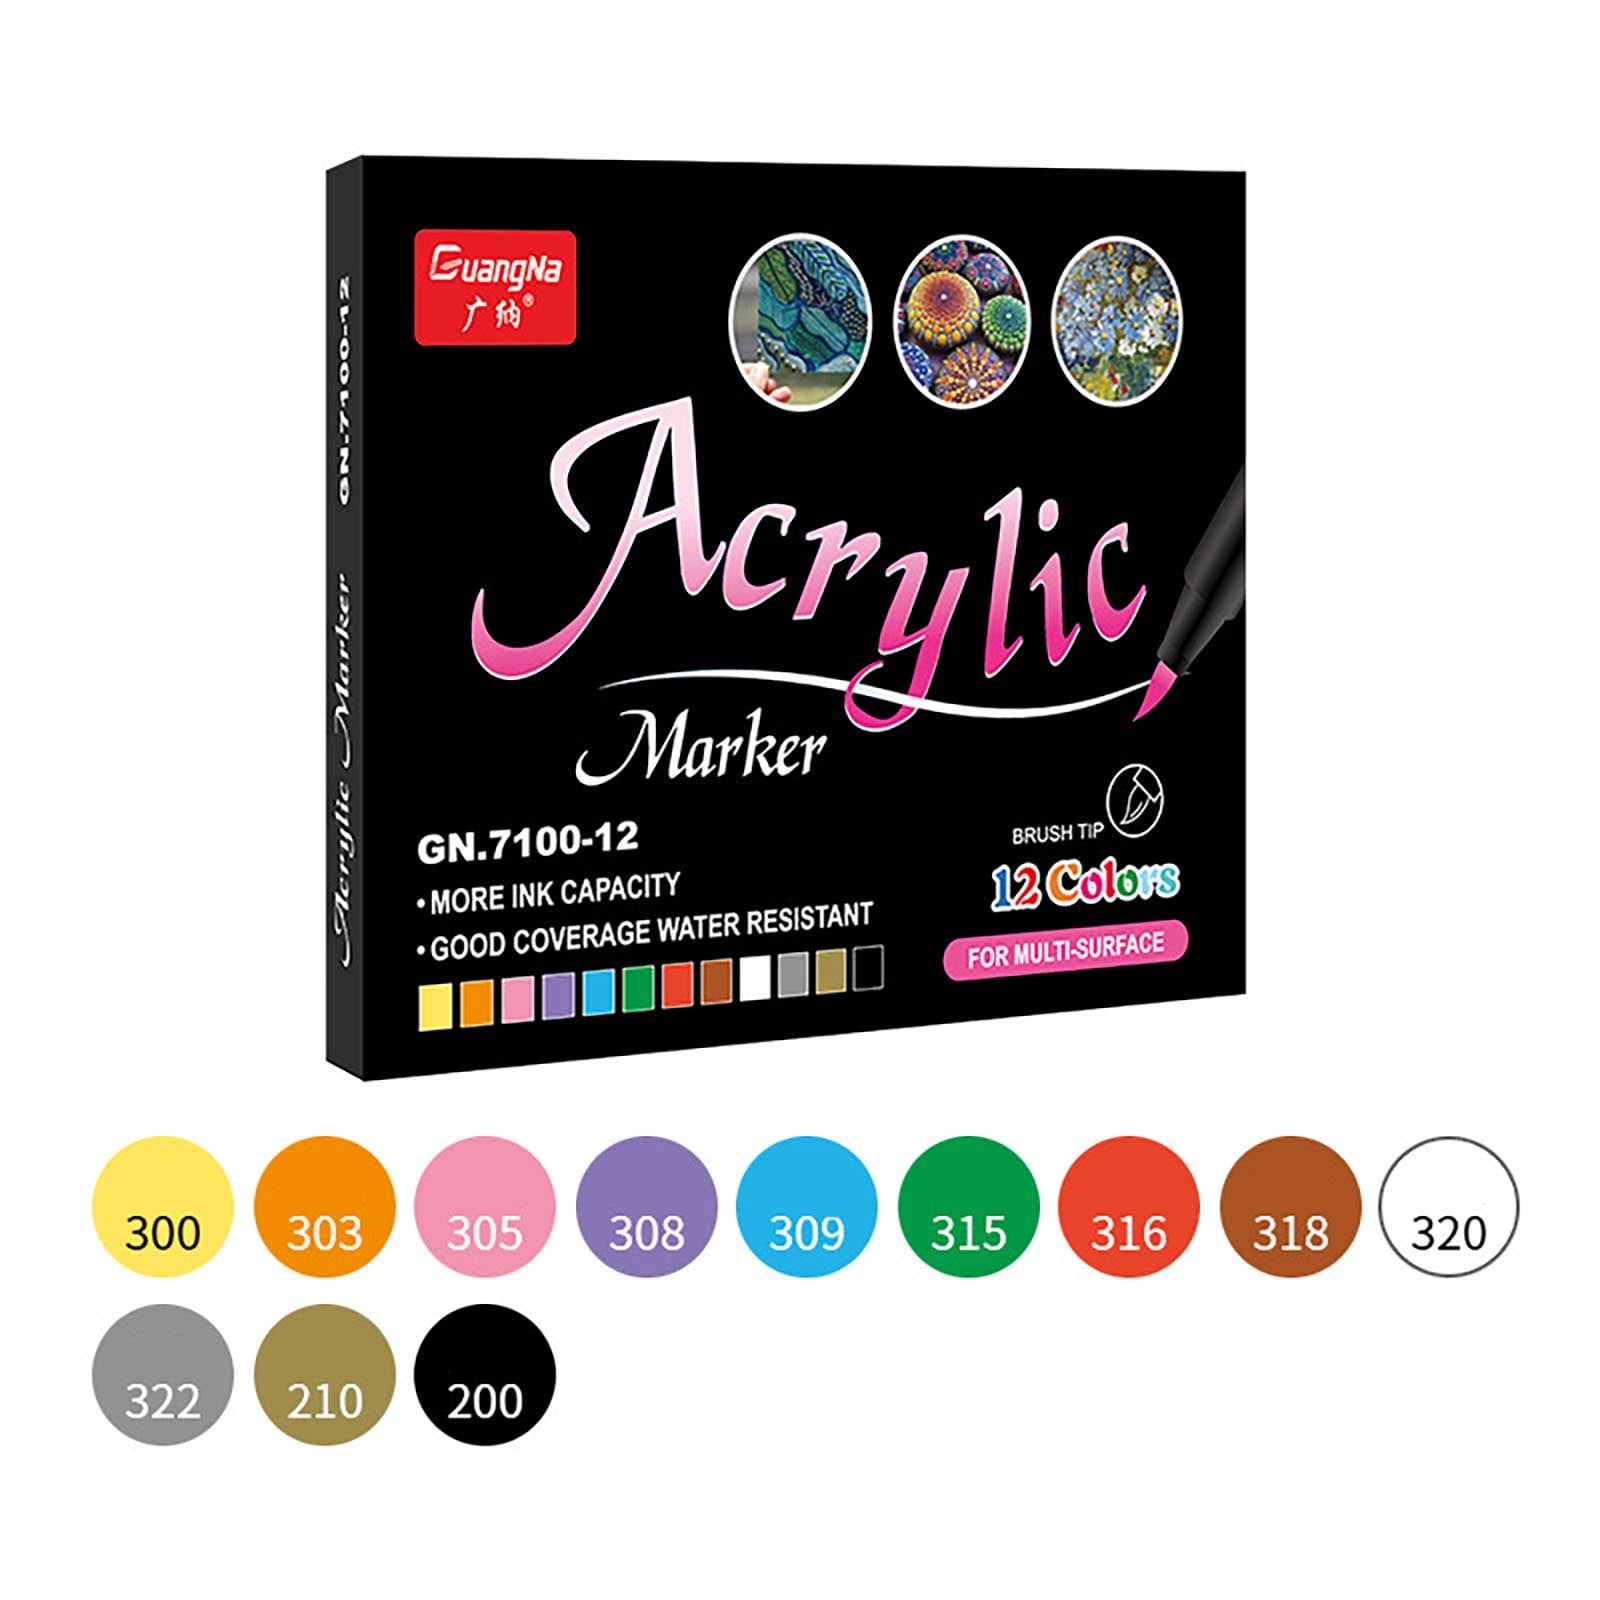 AEDAGA 80 Colors Alcohol Markers with Free App, Dual Tip Art Markers with  Kickstand Case for Artists Adults and Kids. Alcohol Based Markers for  Coloring Painting Sketching and Drawing, Great Gift. 